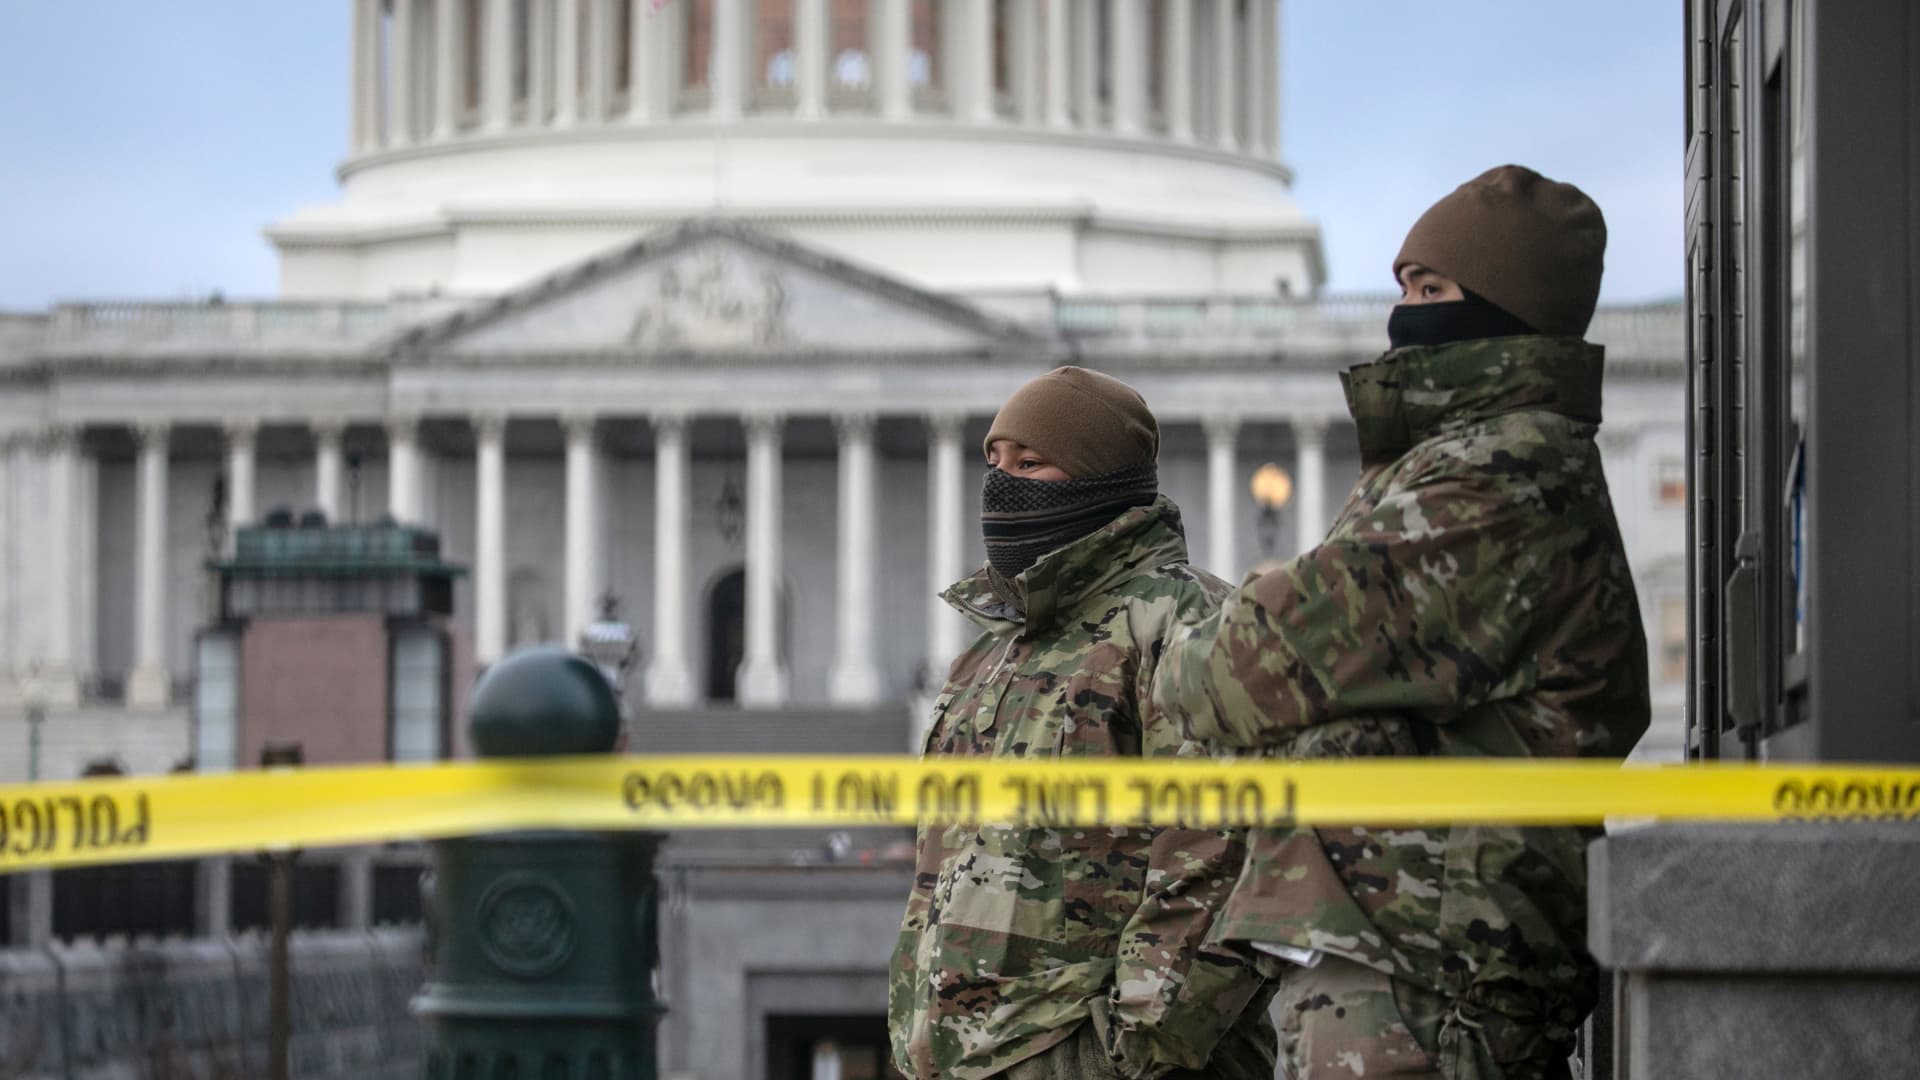 DC National Guard troops stand watch at the U.S. Capitol on January 08, 2021 in Washington, DC. Fencing was put up around the building the day before, following the storming of the Capitol by Trump supporters on January 6.